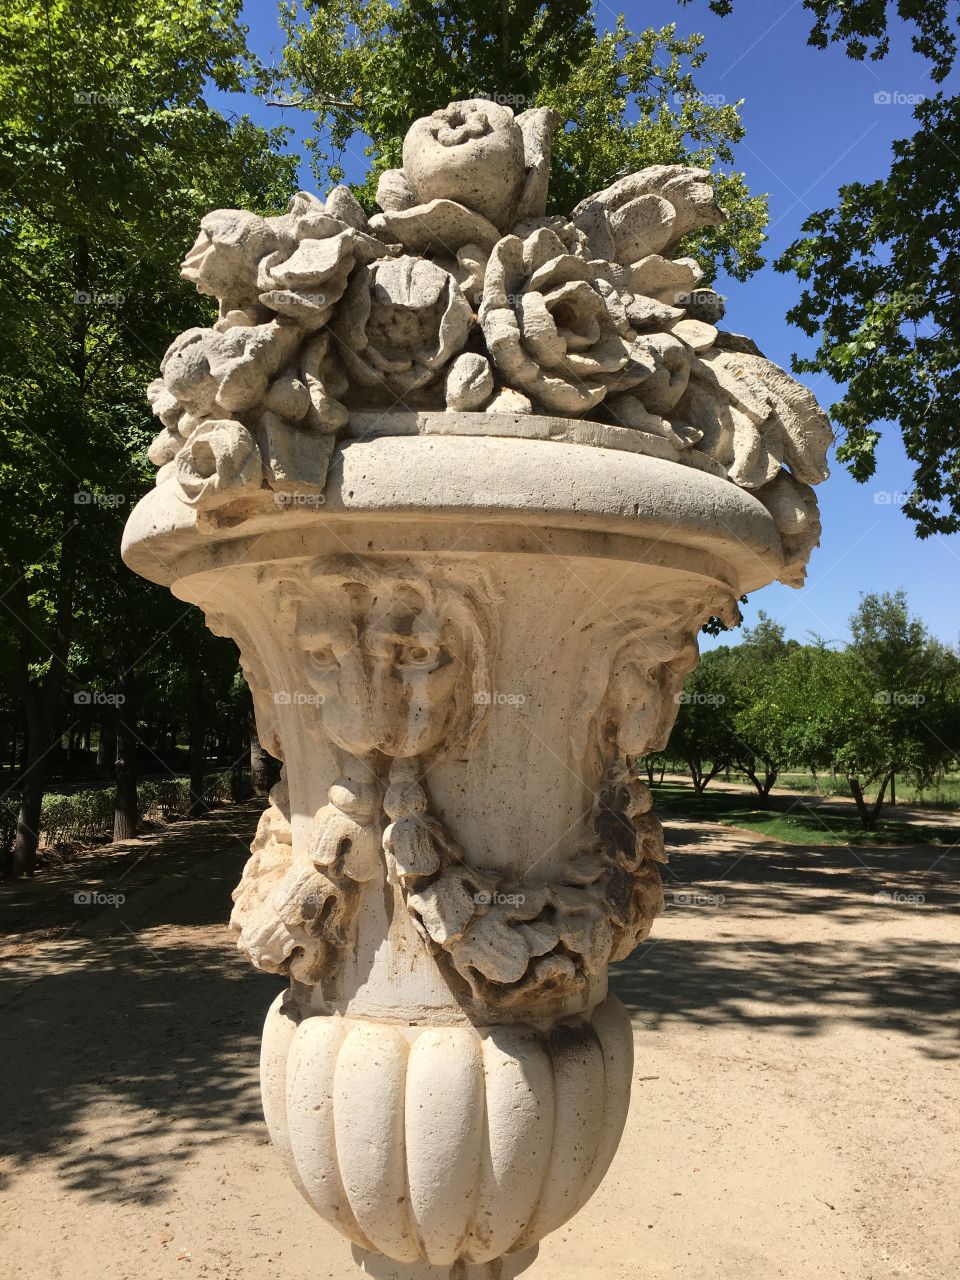 Limestone sculpture depicting a vase with gorgeous flowers on top. Decorative sculpture in the middle garden.